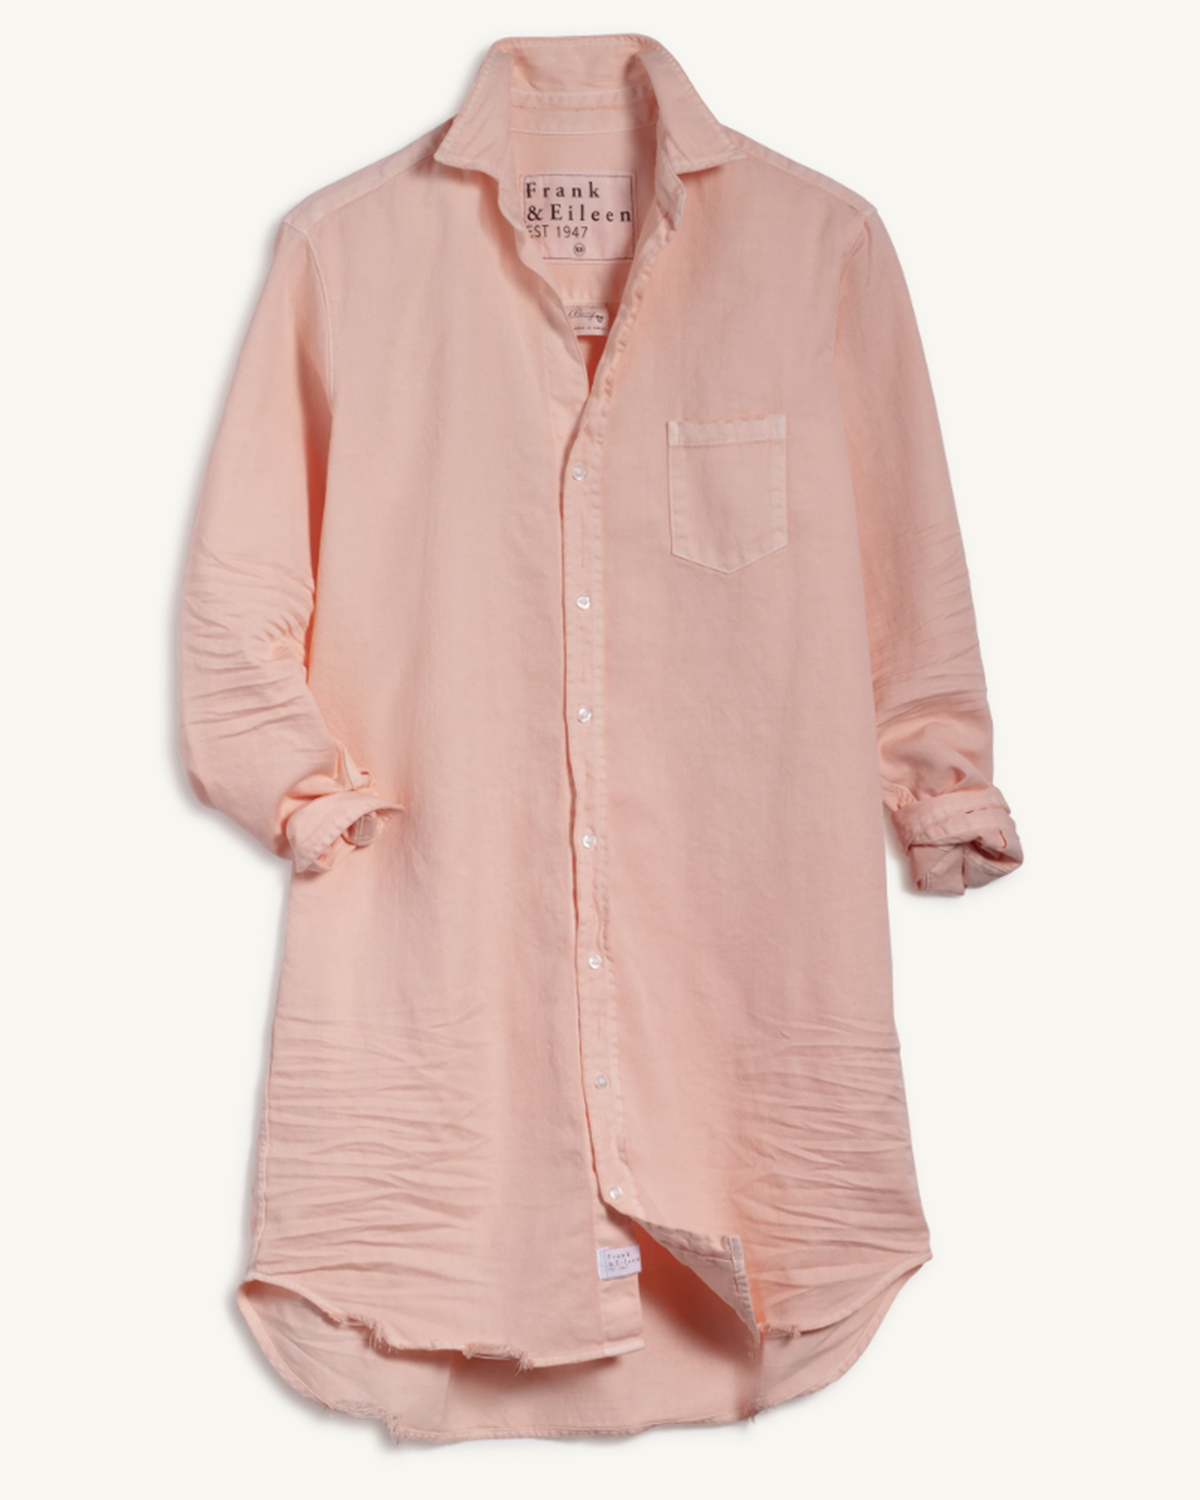 Mary Classic Shirtdress in Creamsicle Tattered Denim